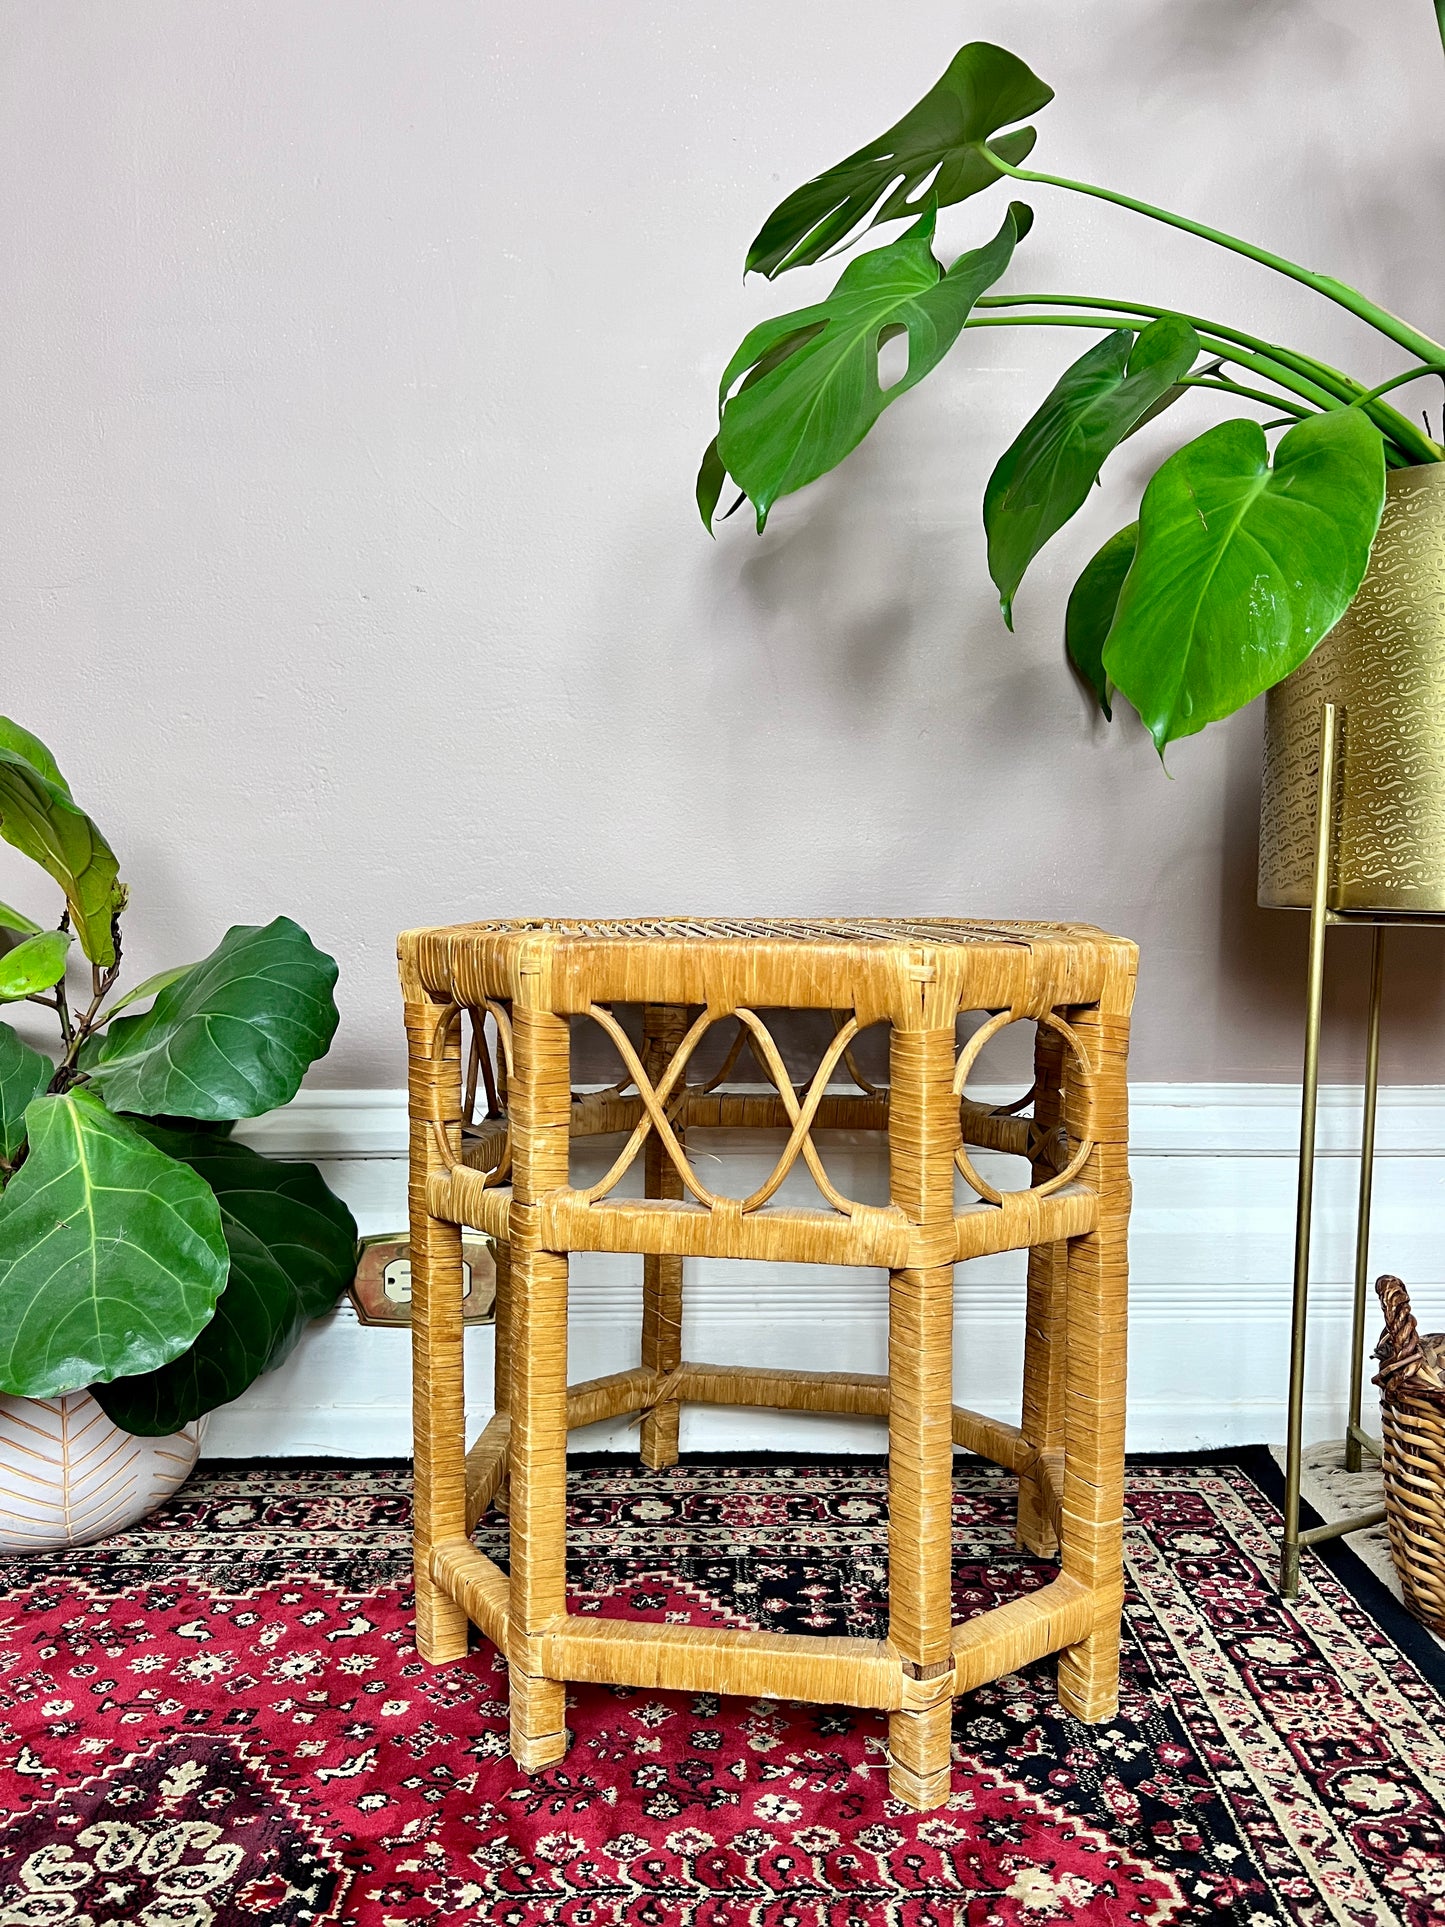 The Wicker Table